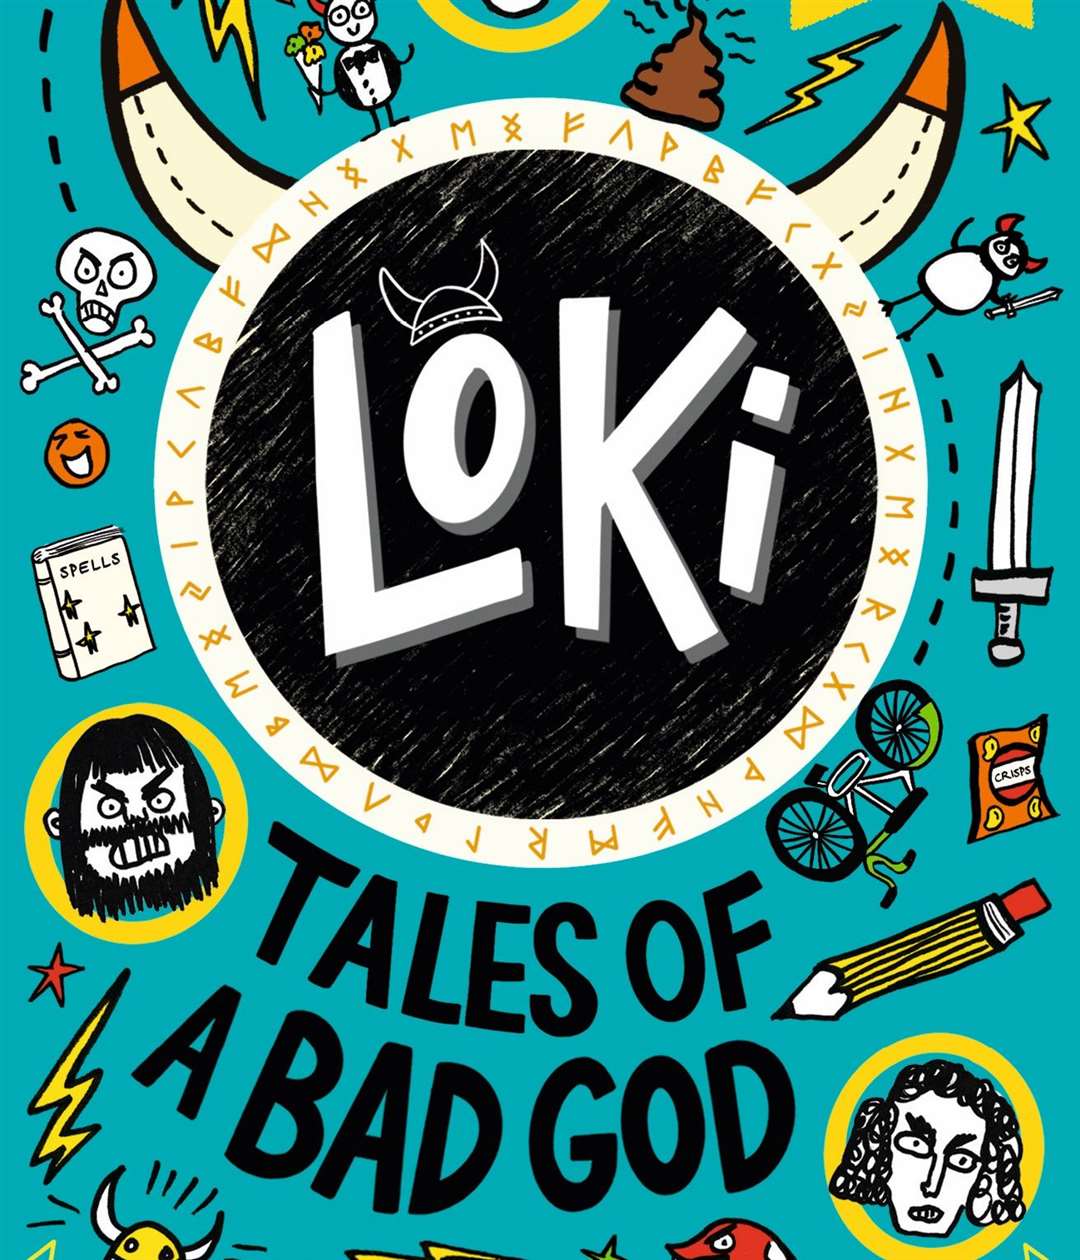 Loki has a tale for young readers